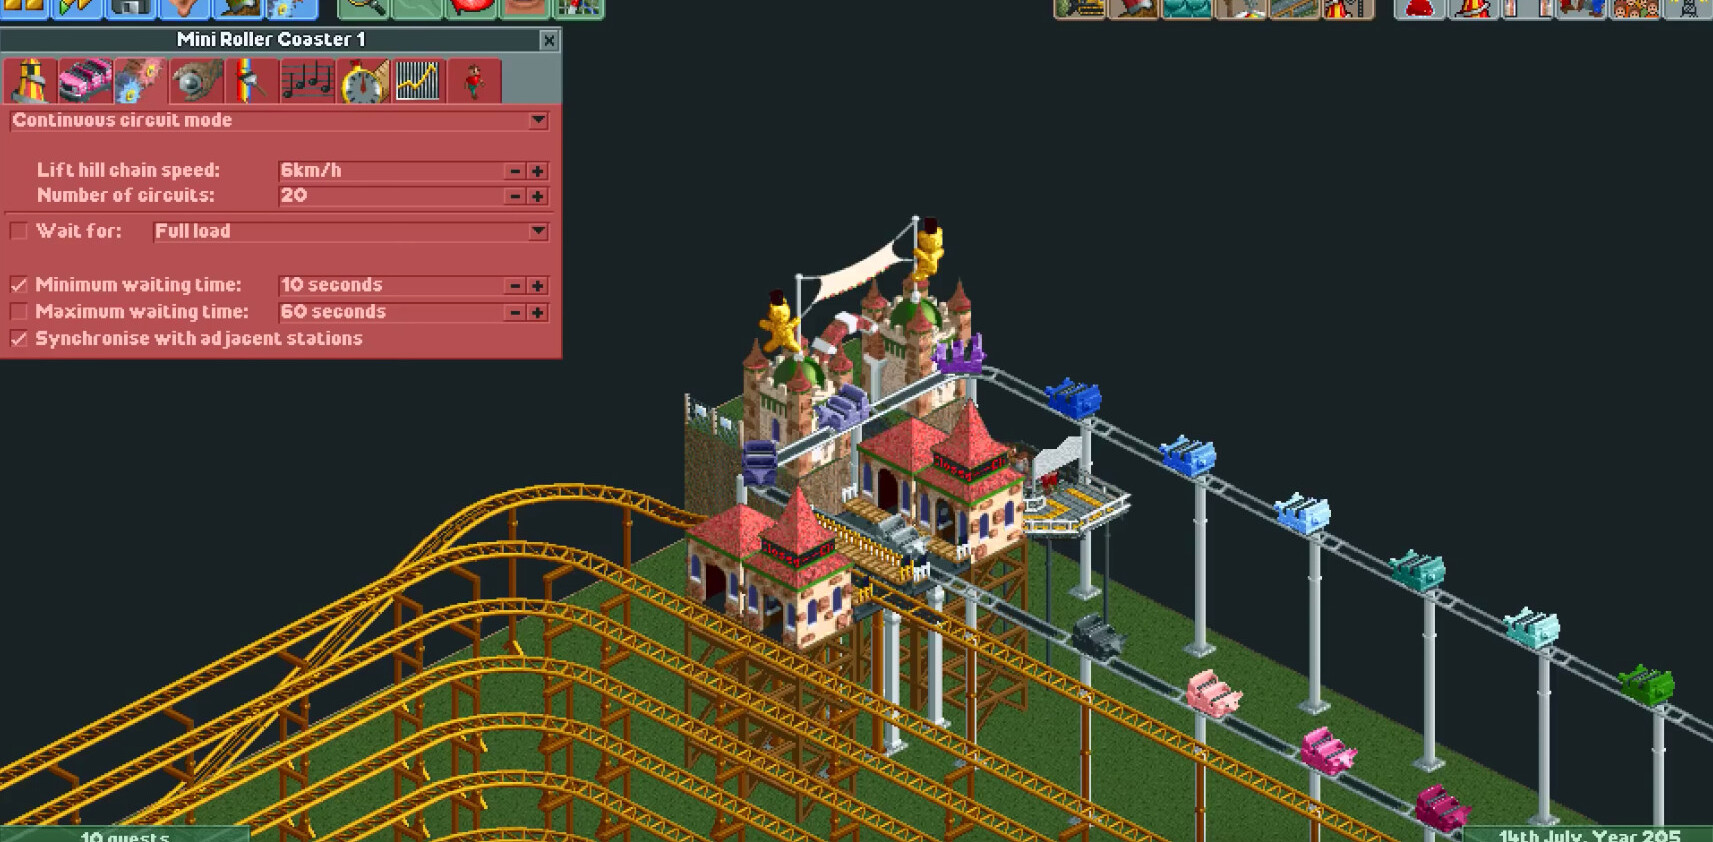 Roller Coaster Tycoon enthusiast created a coaster that takes 12 years (and real bladder control) to ride